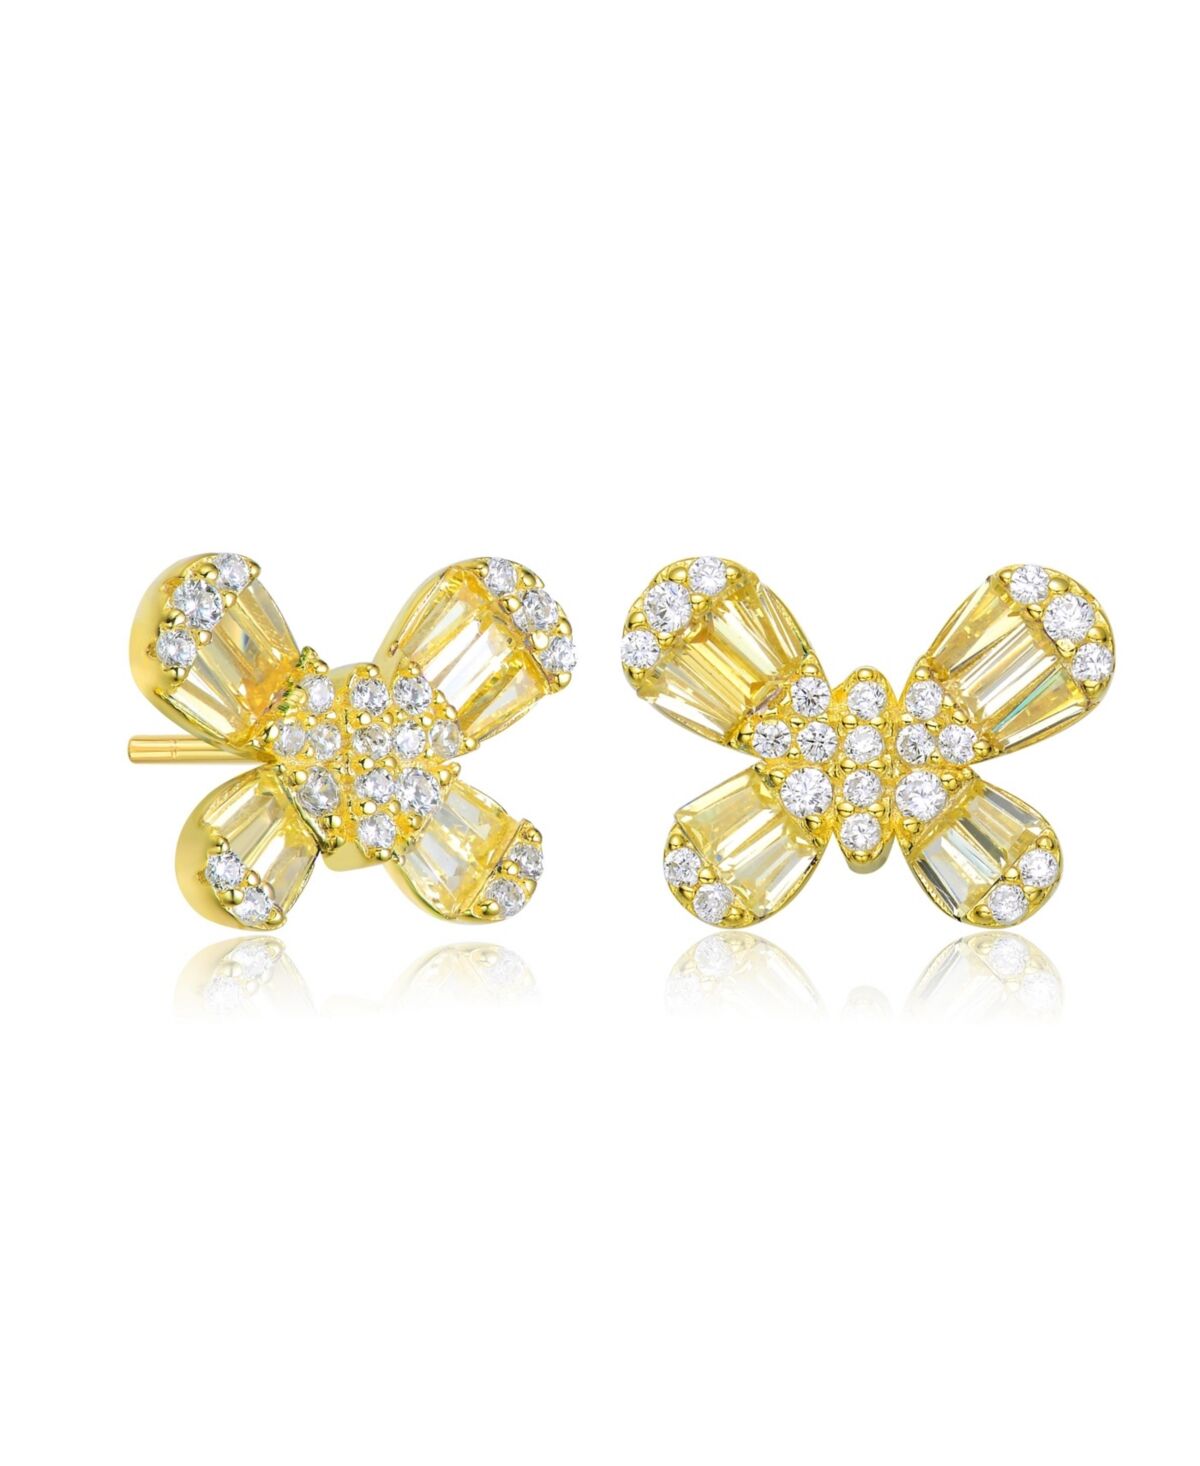 Gigigirl Gigi Girl Teens/Young Adults Sterling Silver with Baguette and Clear Round Cubic Zirconia Butterfly Stud Earrings - Yellow